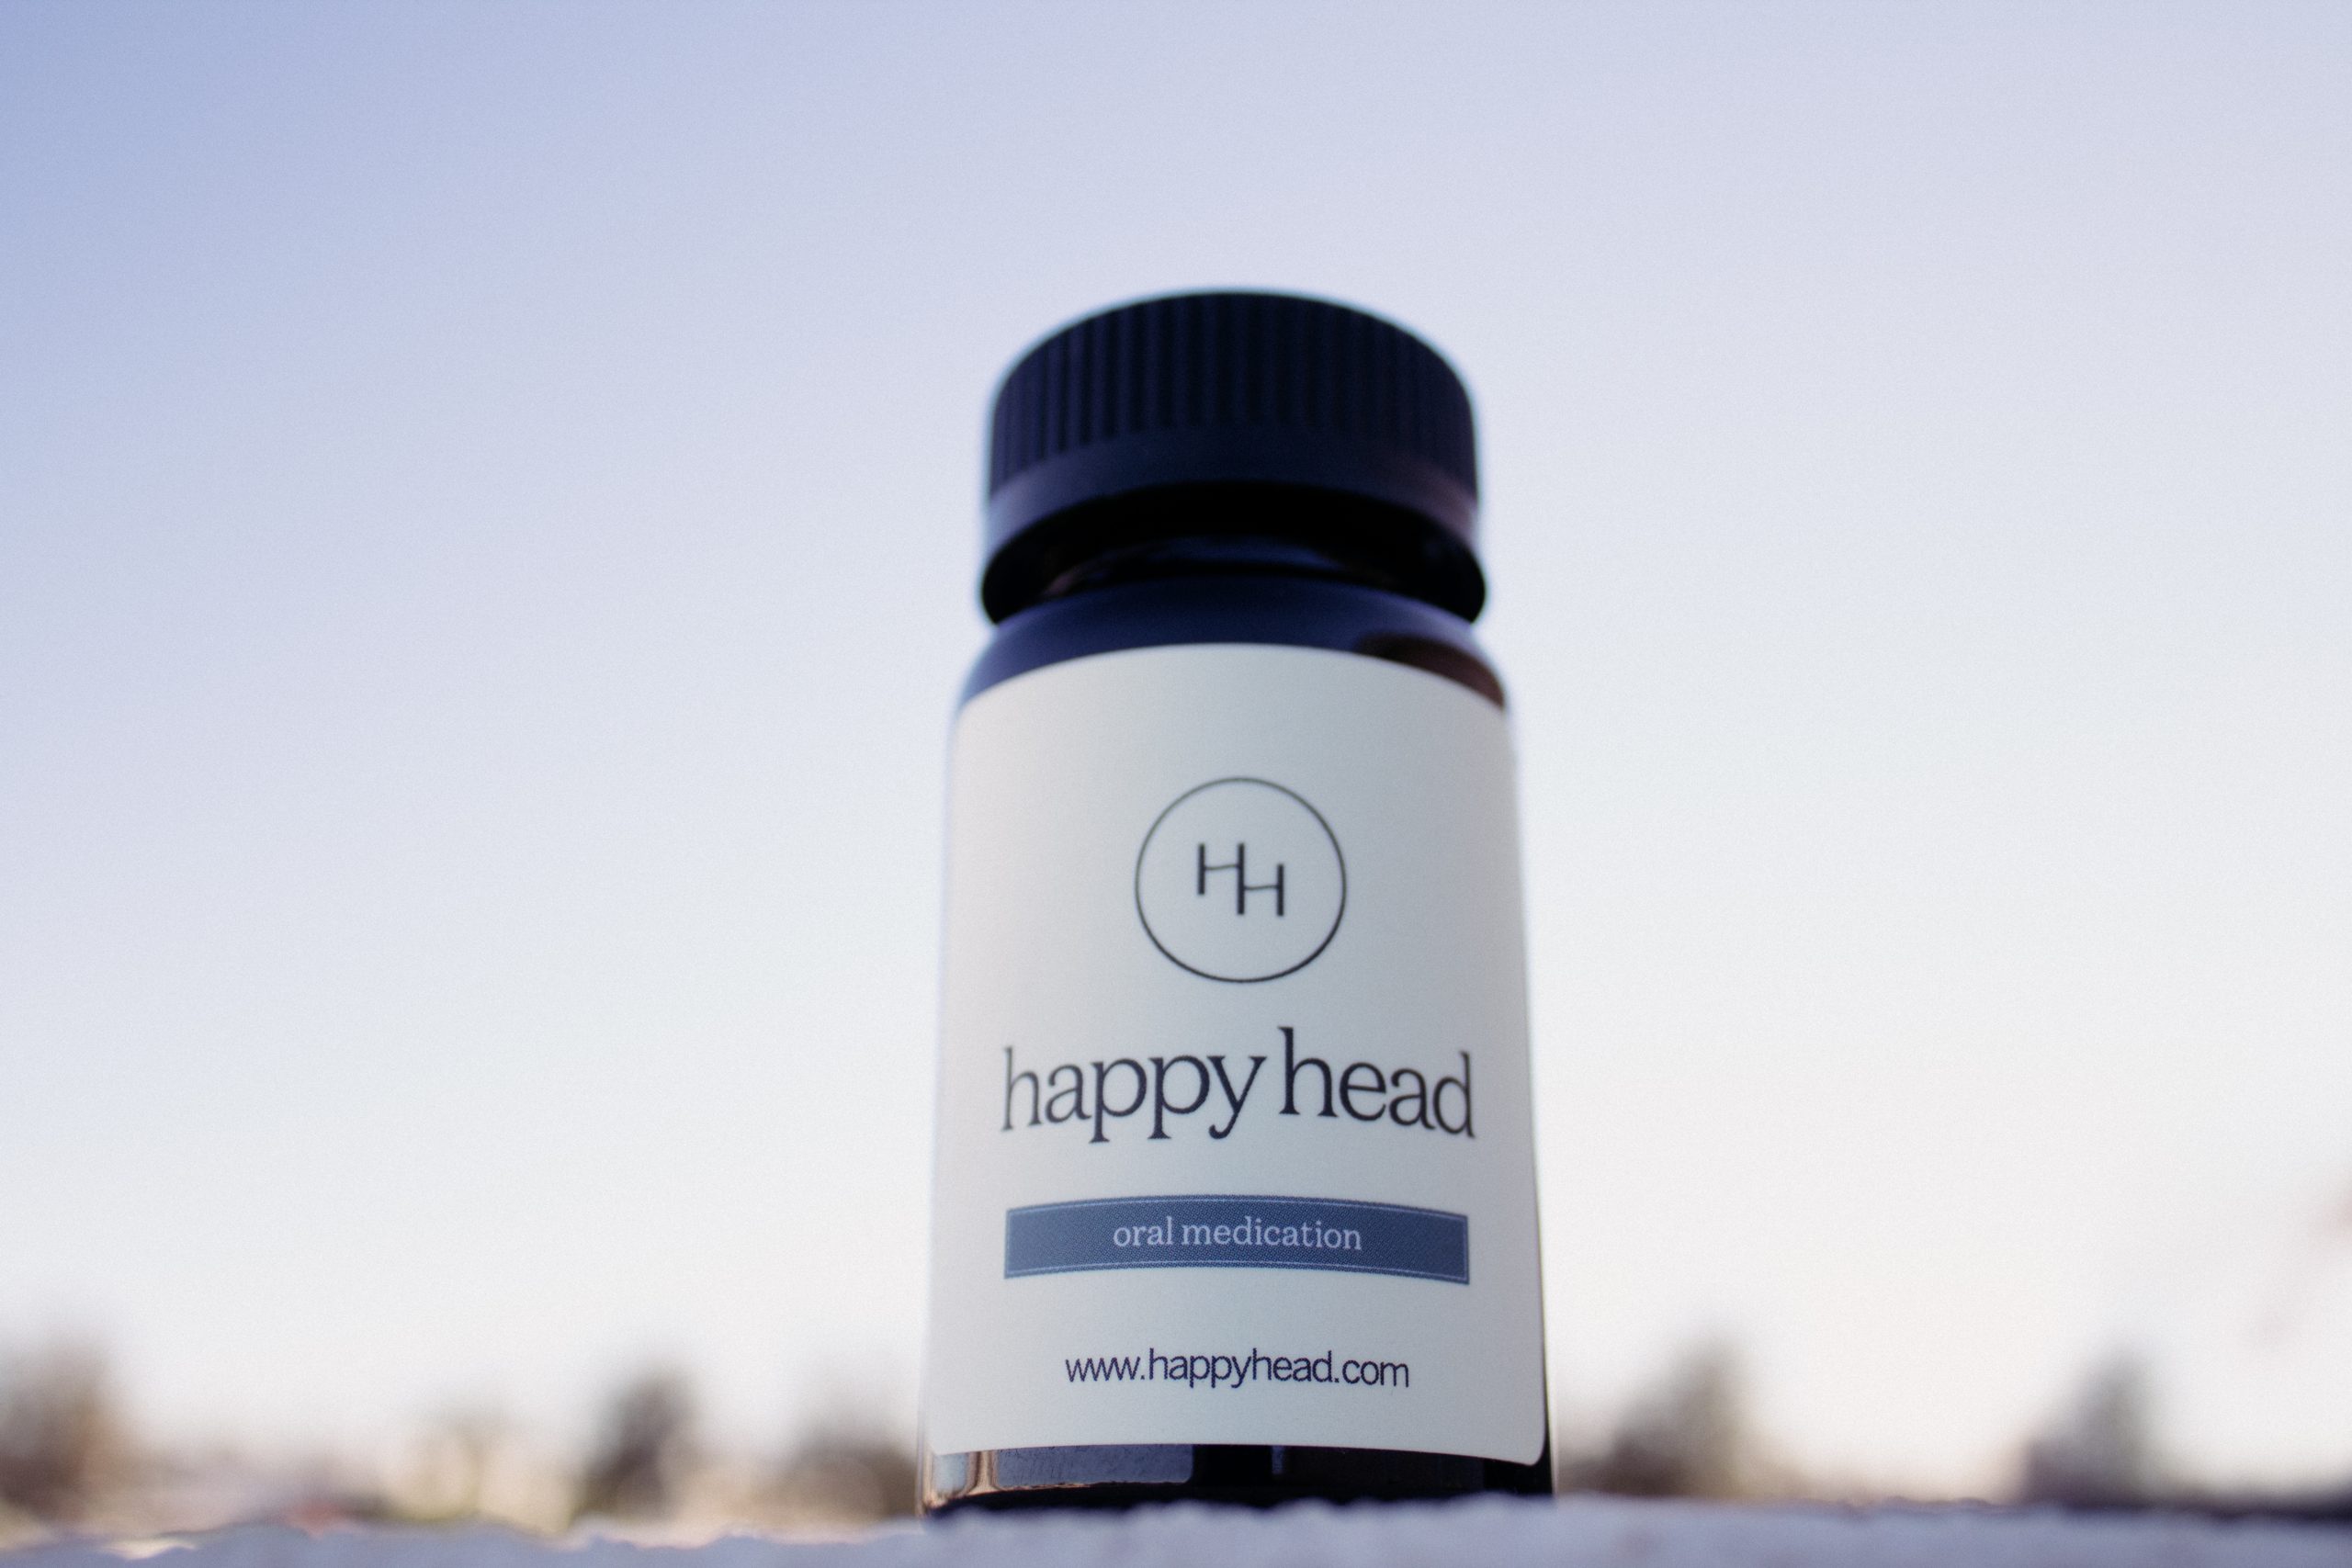 Happy Head's 3-in-1 SuperCapsule is the only one of its kind that combines three ingredients for hair growth in one oral treatment. Get yours prescribed by a Happy Head Dermatologist today with Finasteride or Dutasteride. 